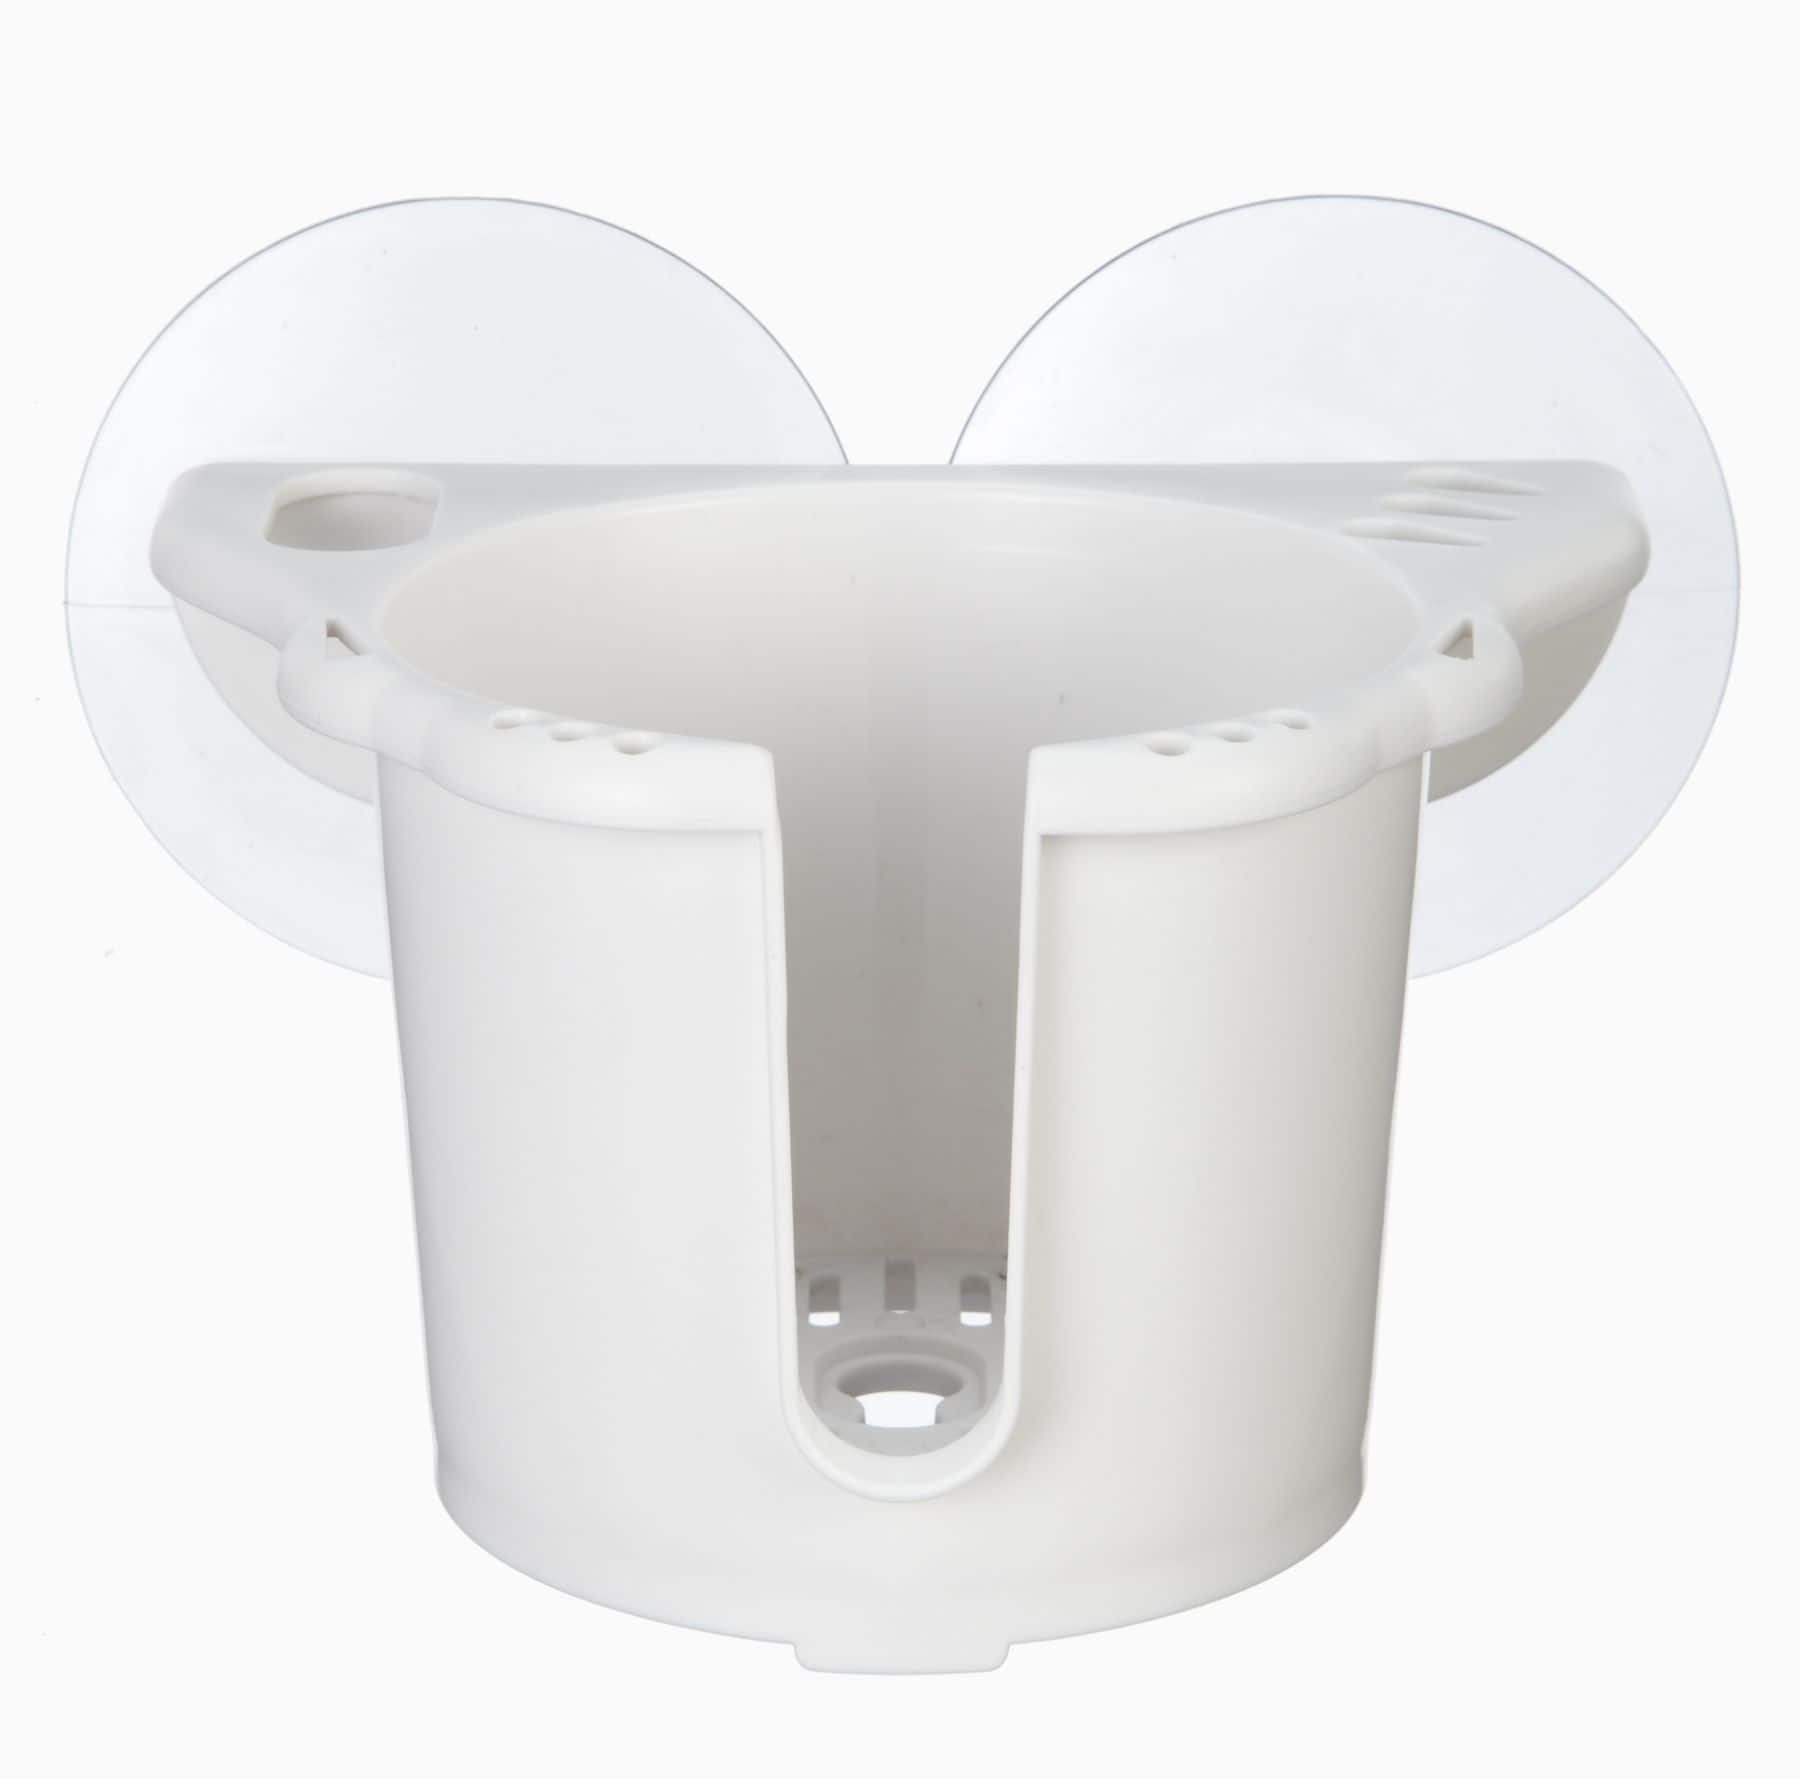 South Bend Boat Drink Holder with Suction Cups, White